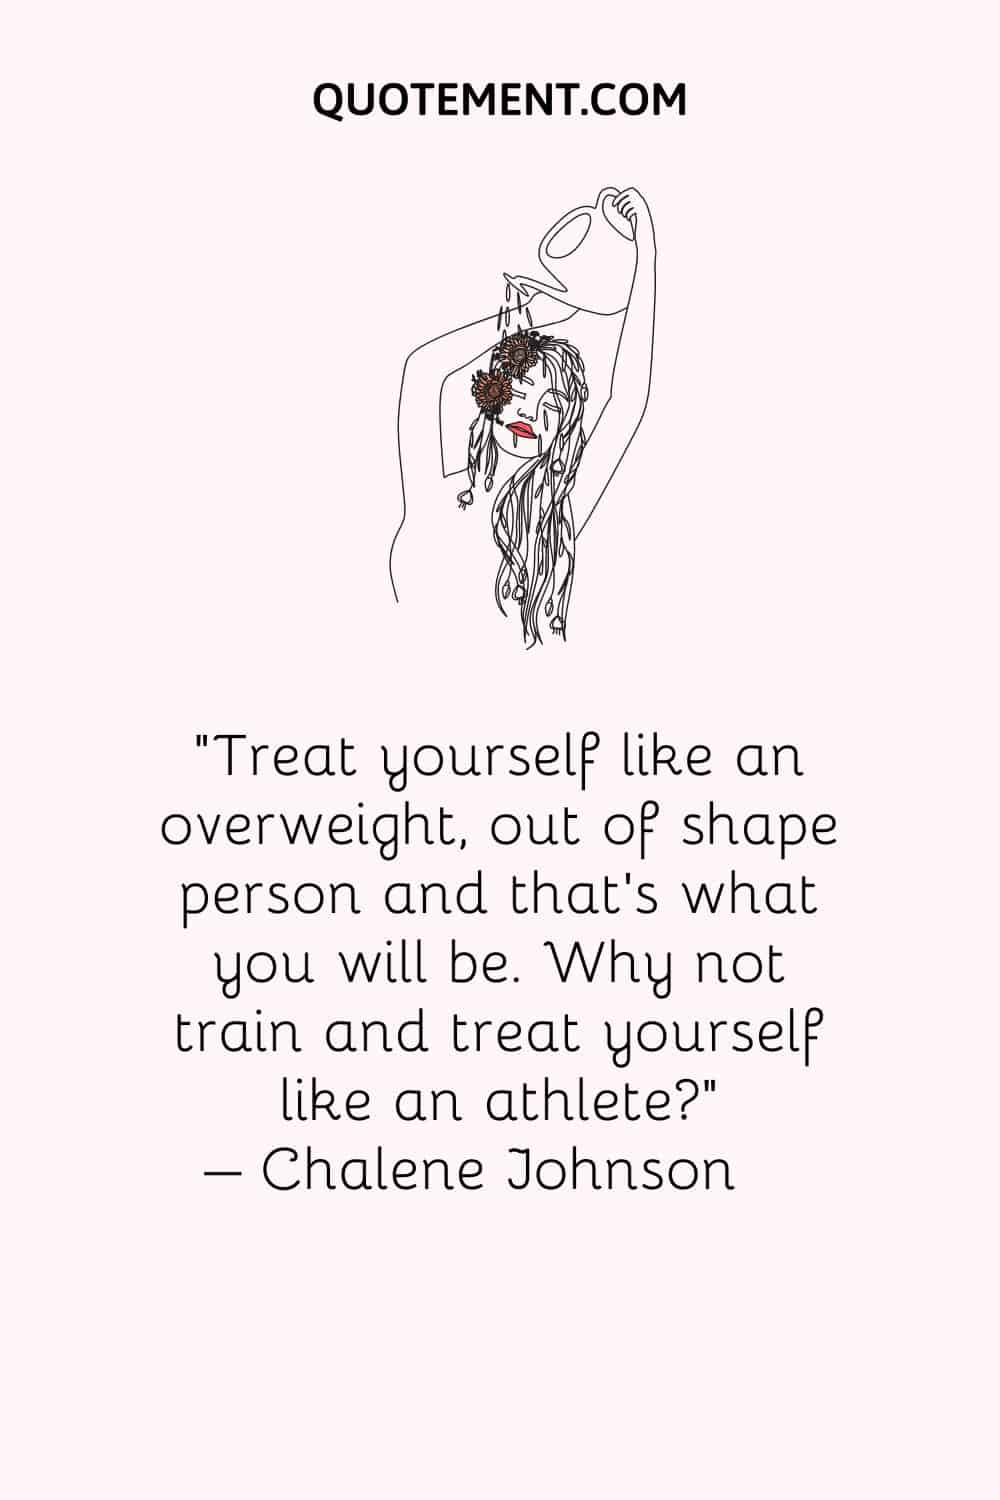 Treat yourself like an overweight, out of shape person and that's what you will be